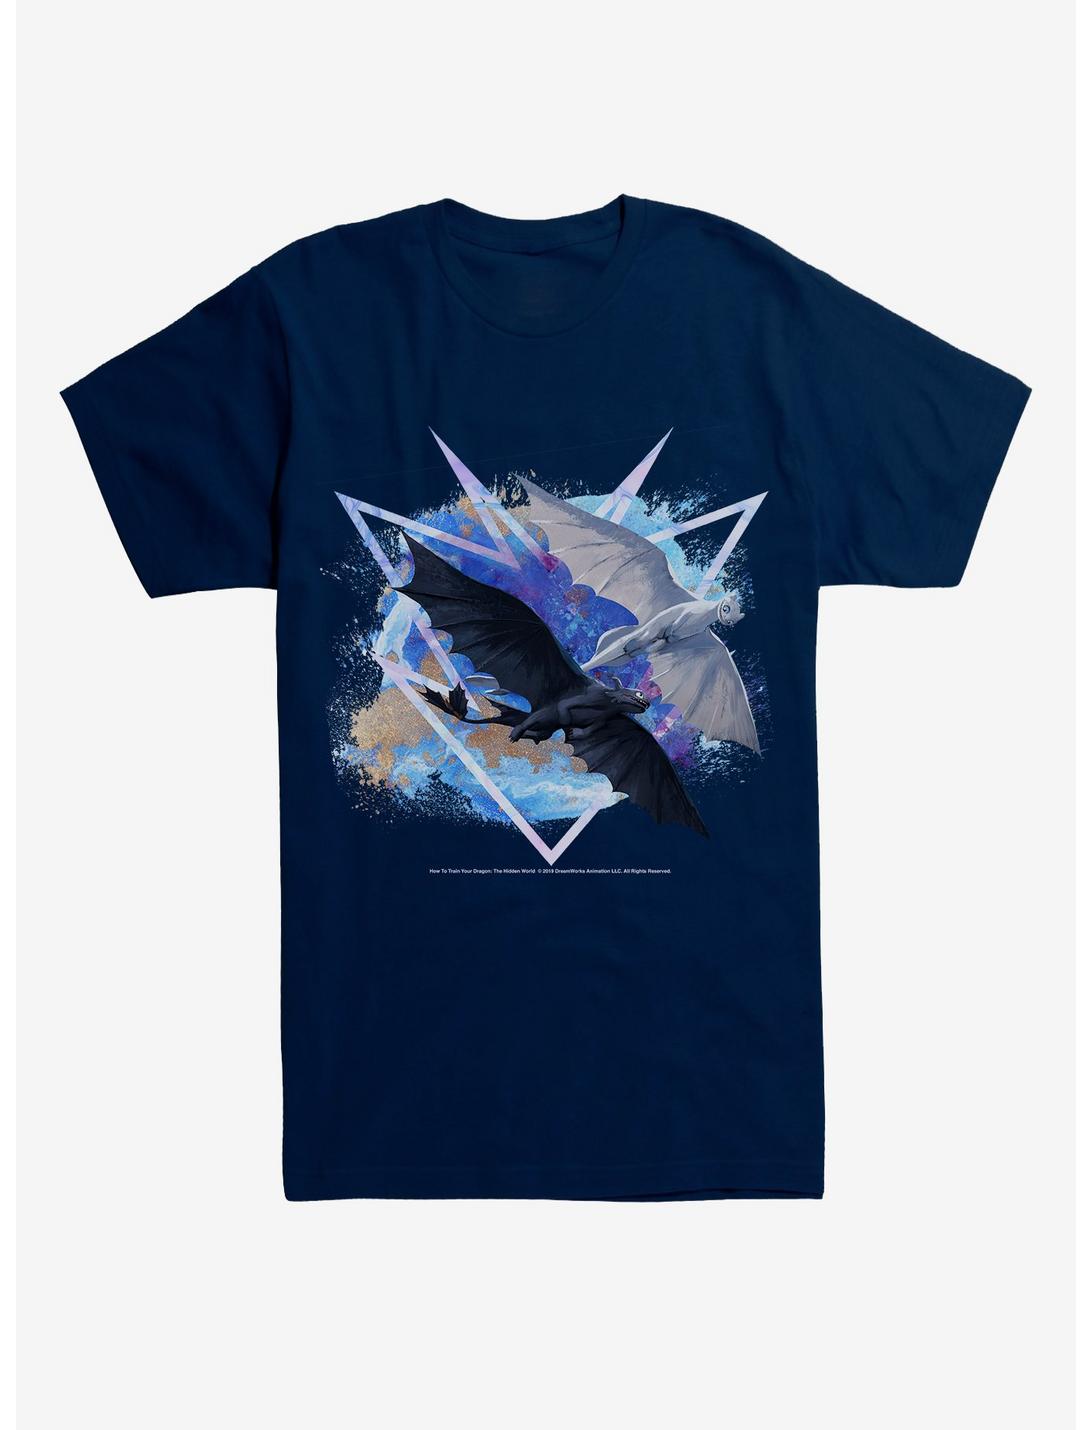 Plus Size How To Train Your Dragon Night & Light Flying Dragons T-Shirt, MIDNIGHT NAVY, hi-res